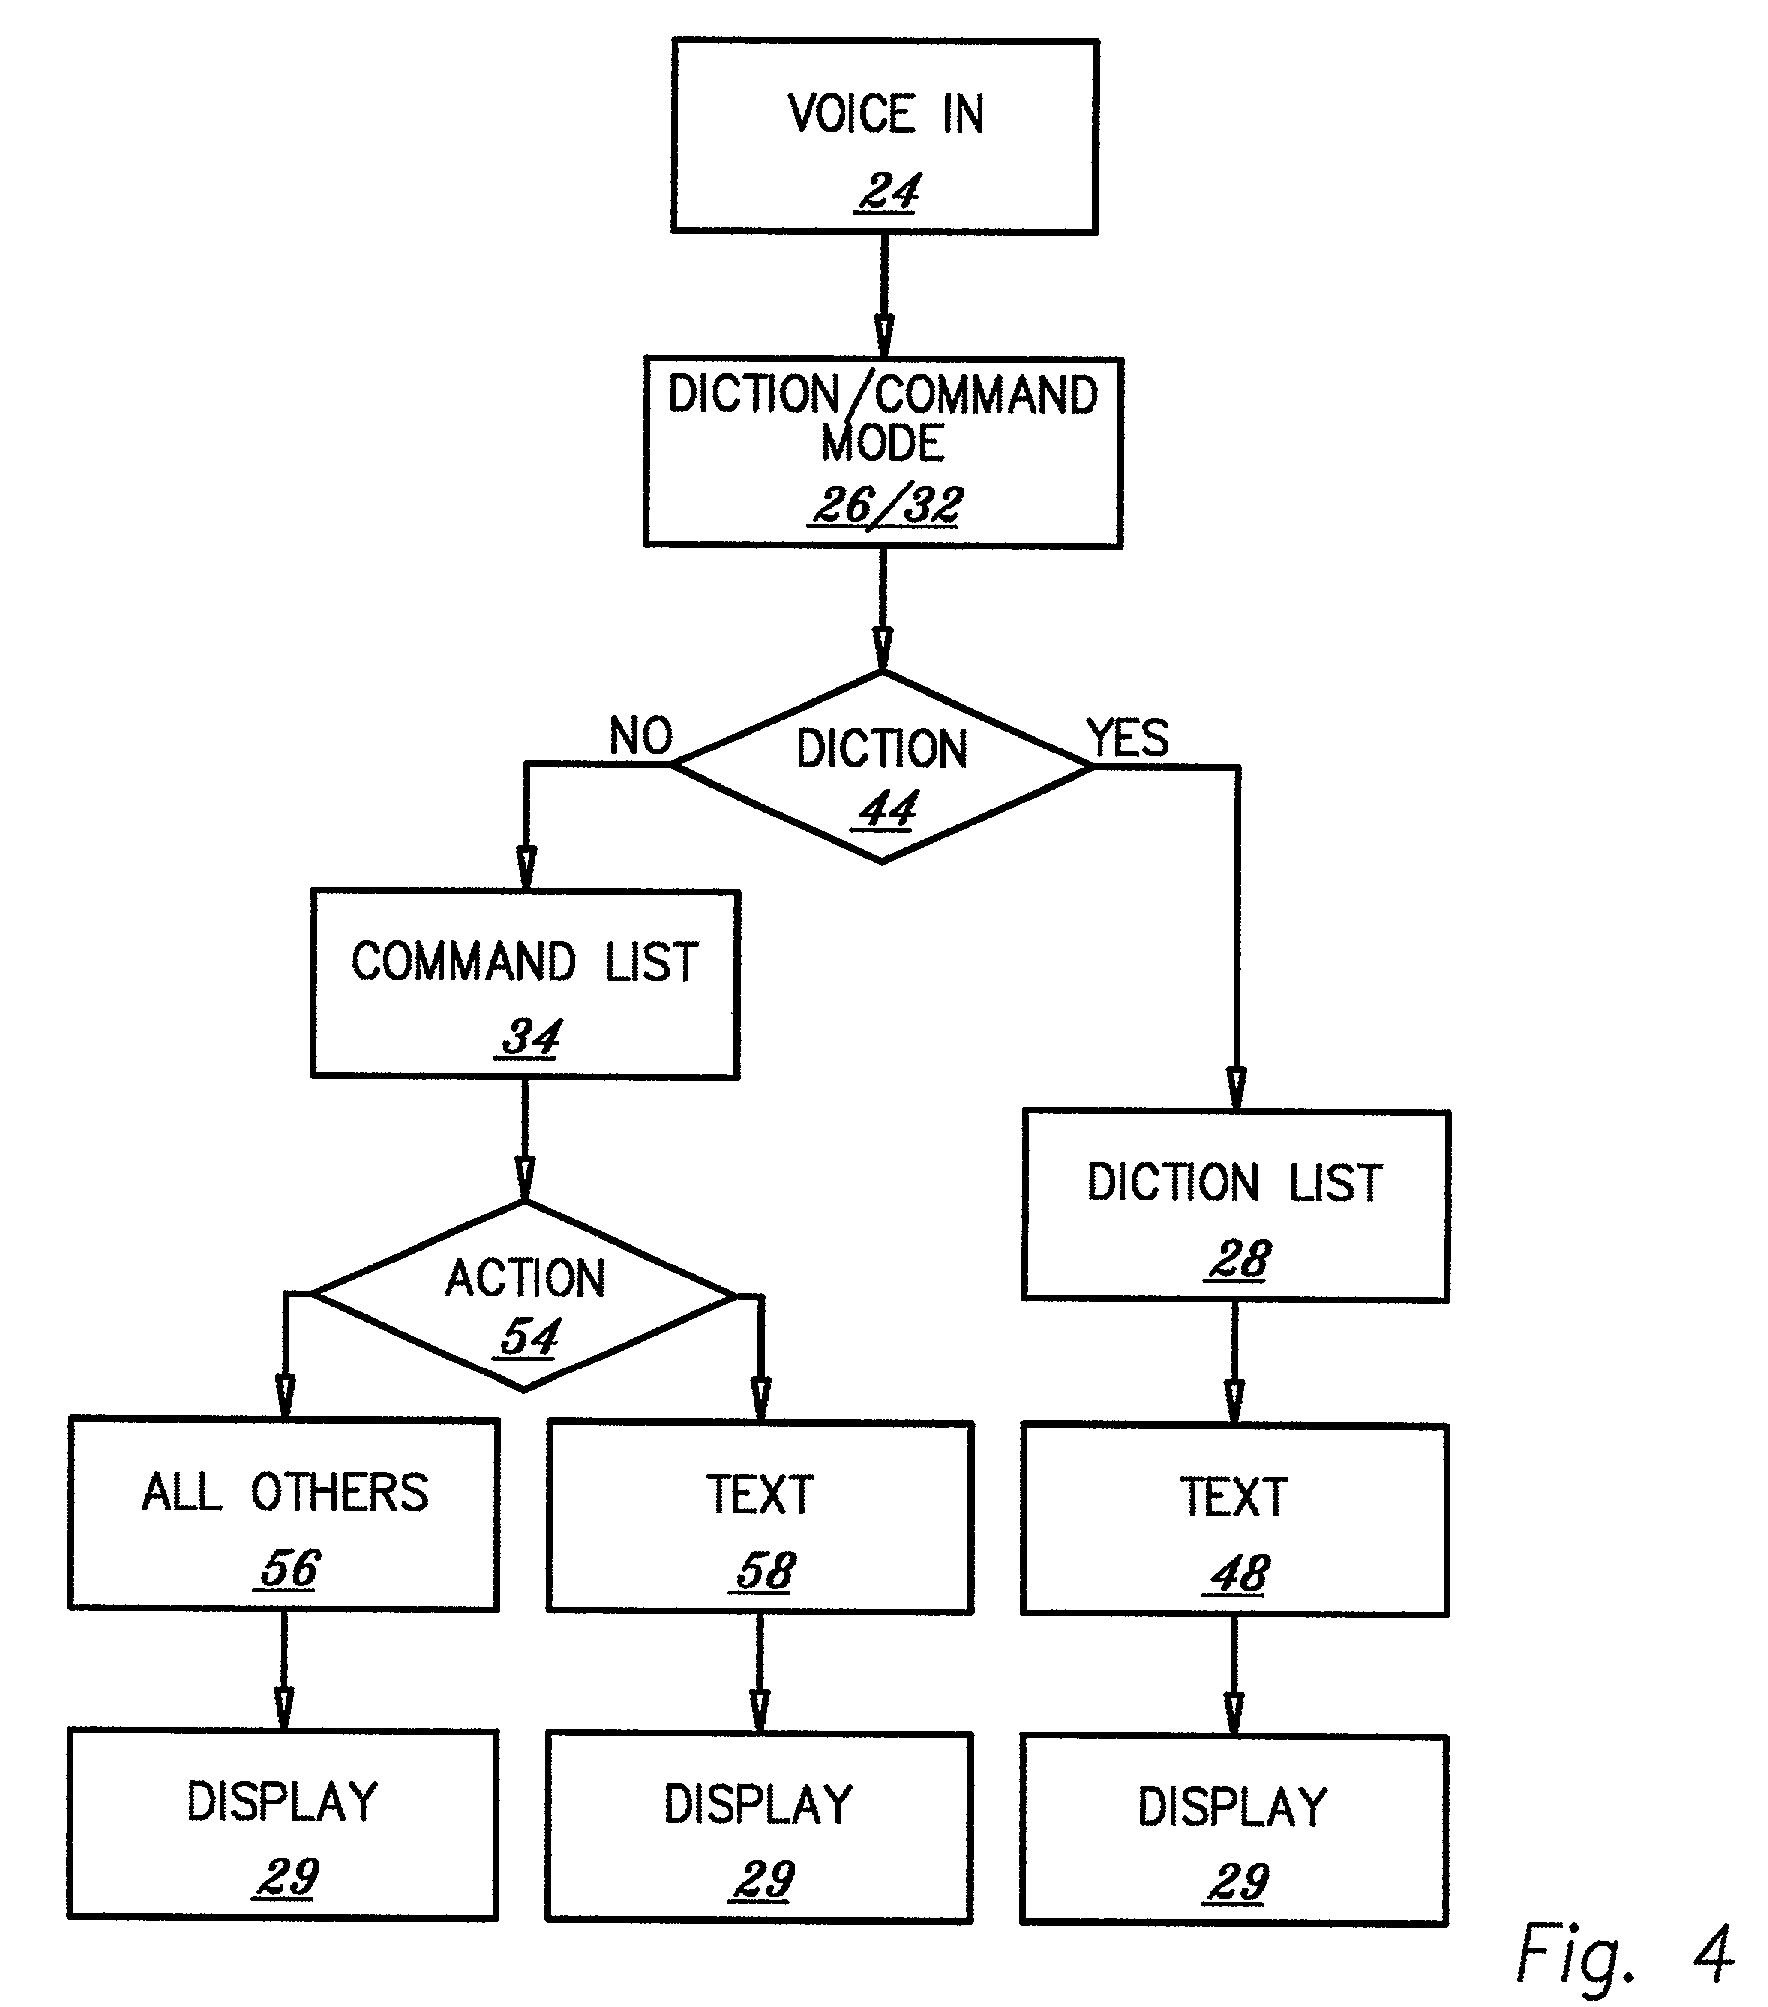 Command insertion system and method for voice recognition applications